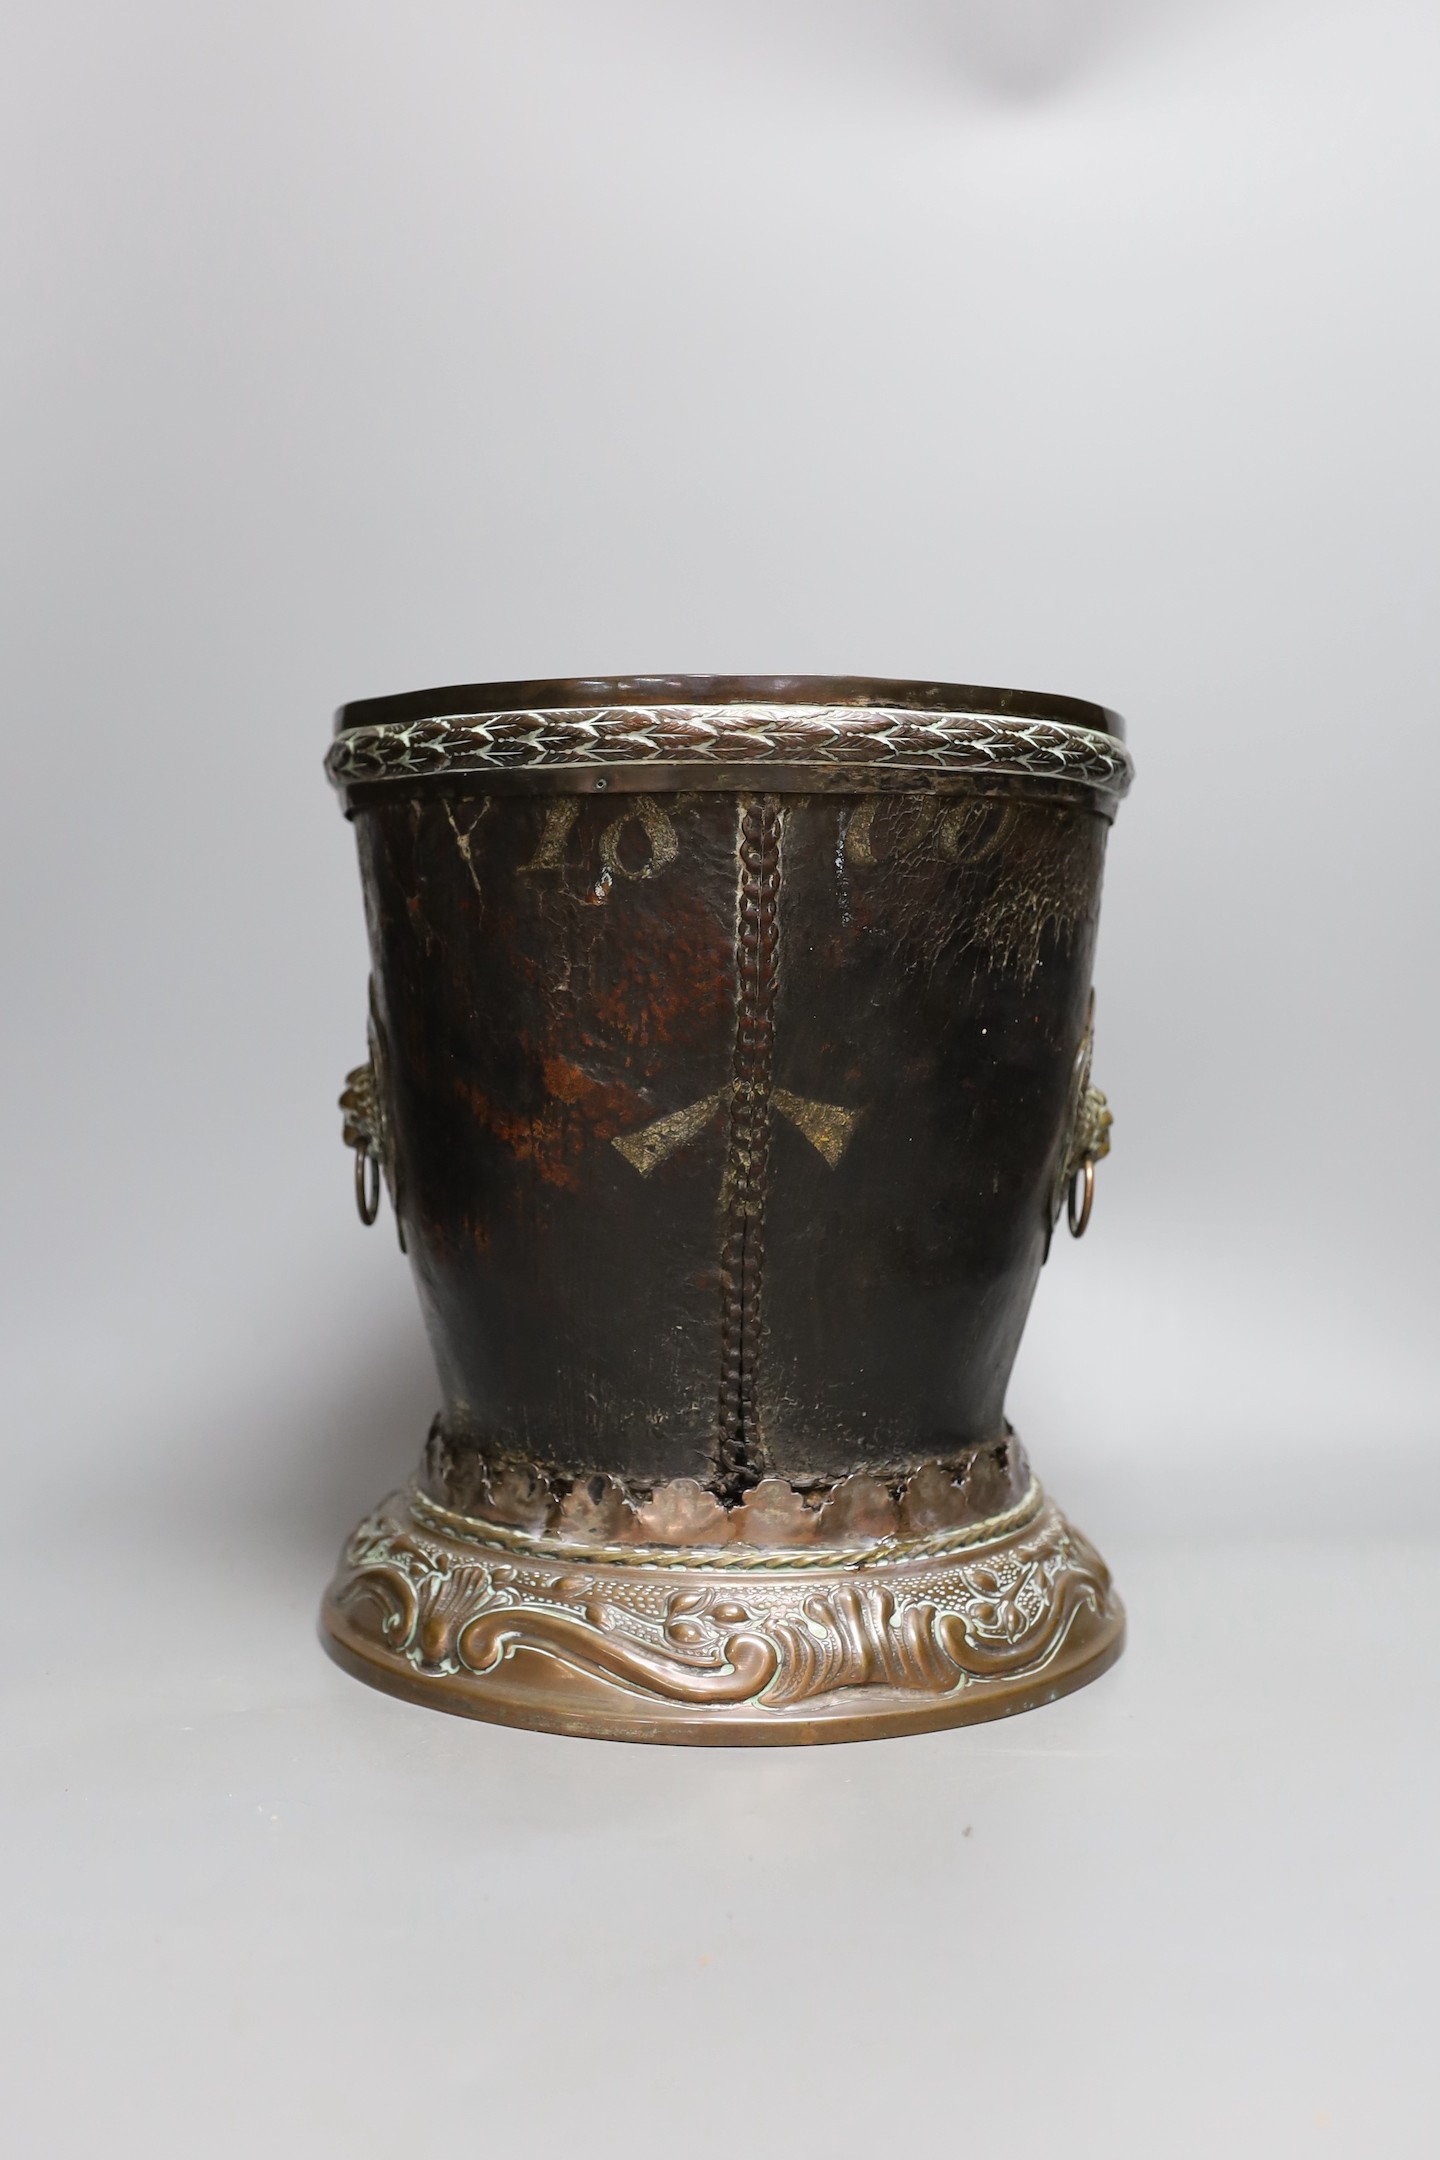 A George III leather fire bucket dated 1800, with later 19th century mounts, inscribed 'GR 1800 Pavilion' (cut down), 27cm tall